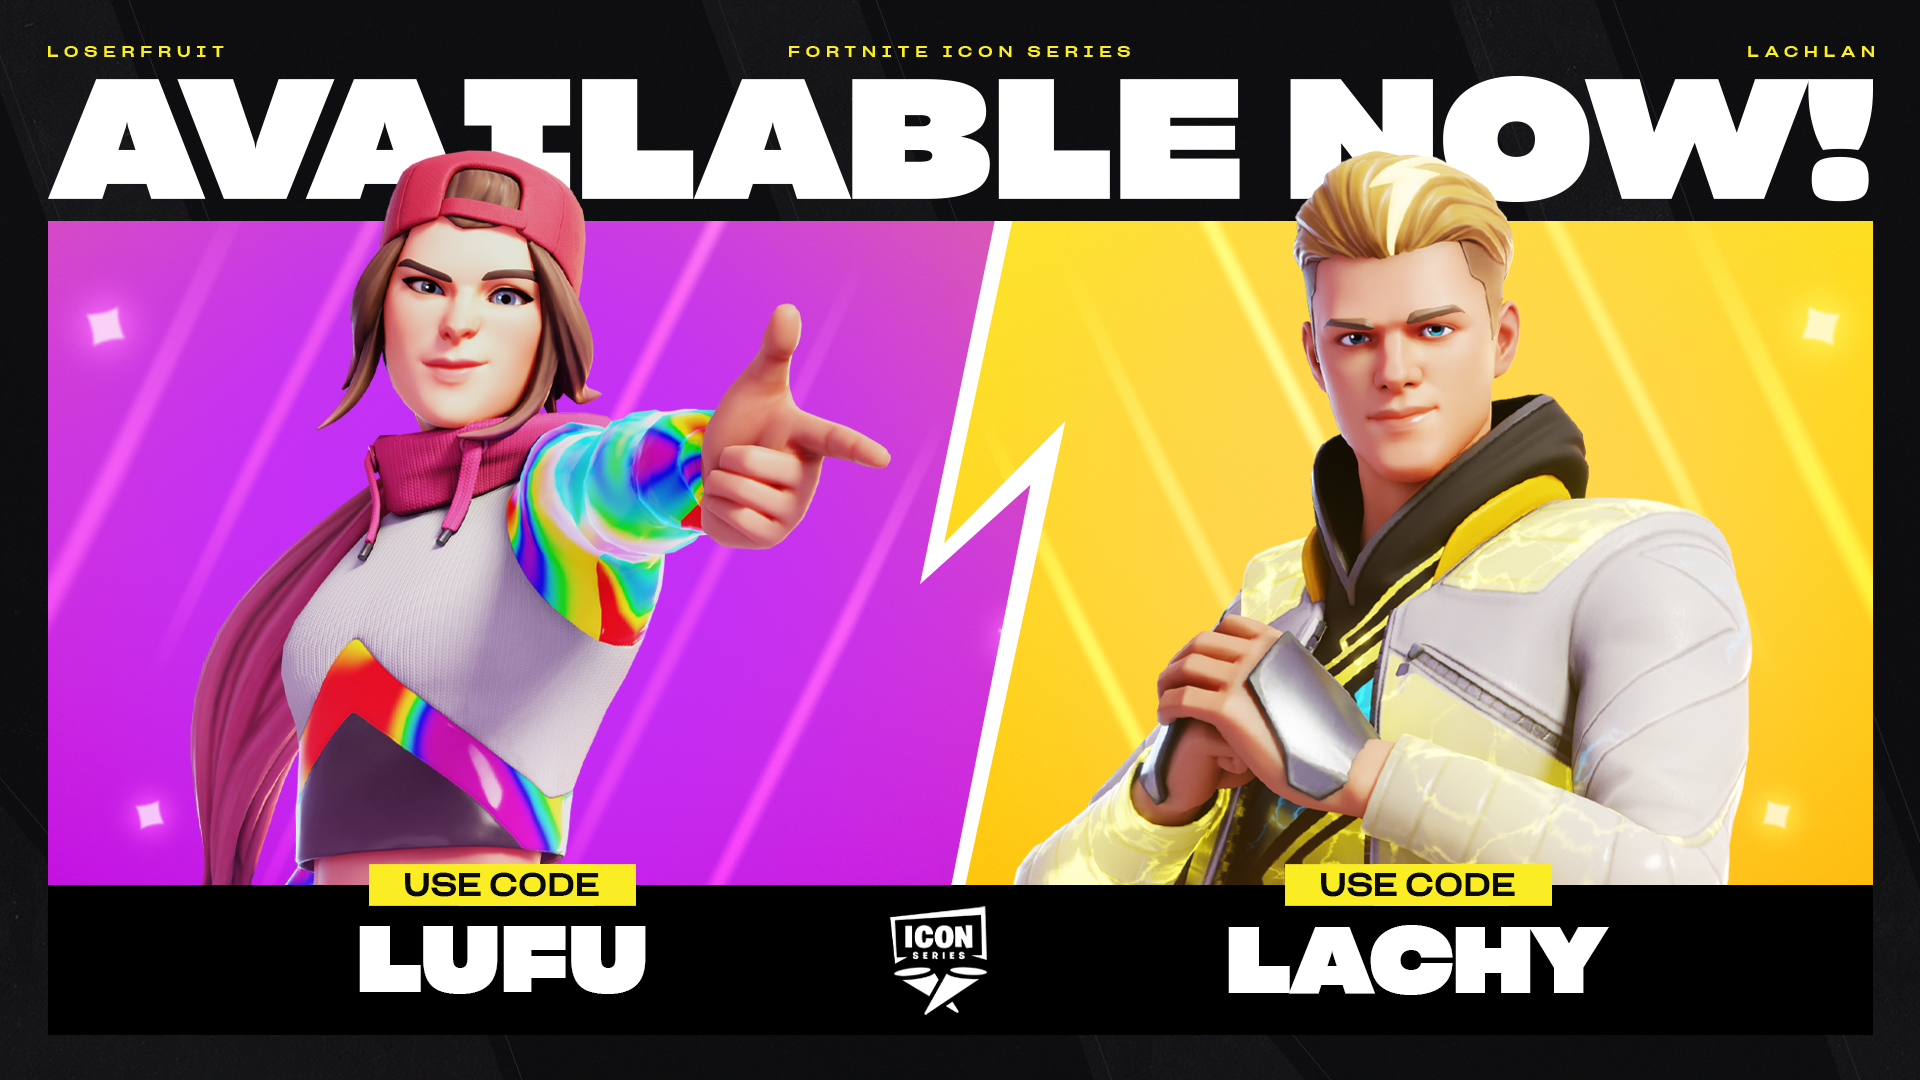 Loserfruit Joins the Fortnite Icon Series!